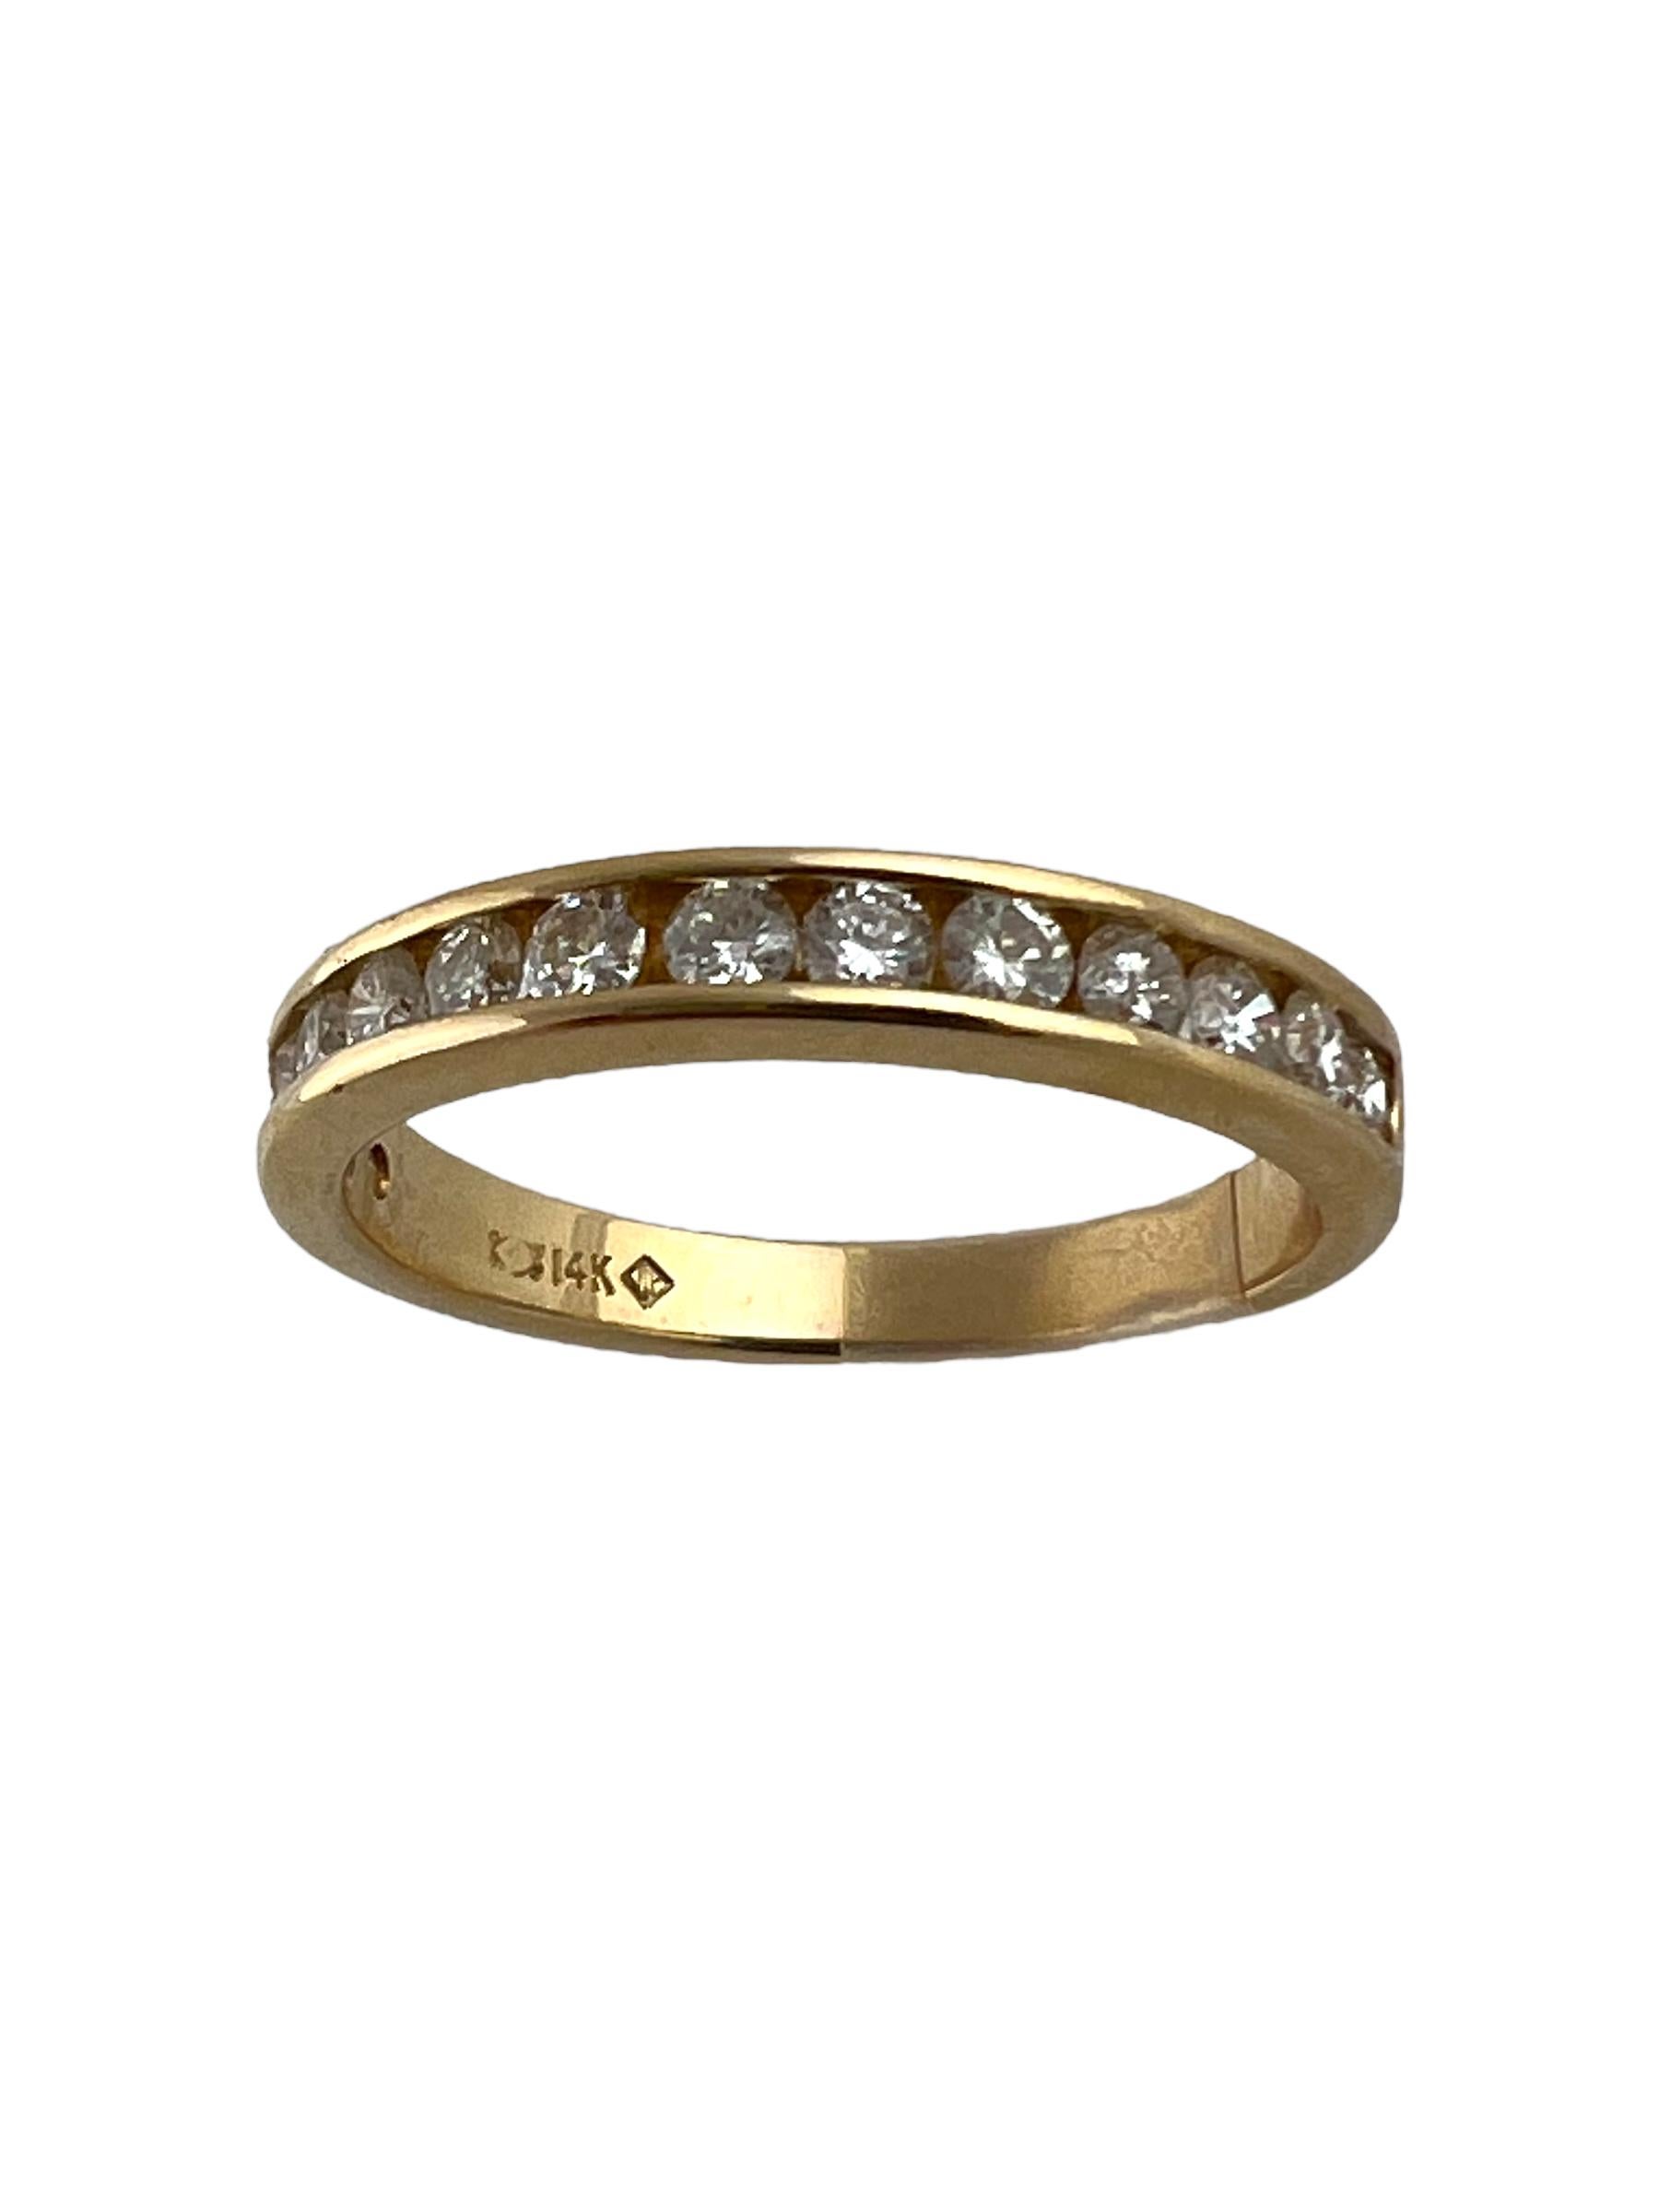 14 Karat Yellow Gold and Diamond Wedding Band Ring Size 6-

This sparkling band features 14 round brilliant cut diamonds set in classic 14K yellow gold.  Width:  3 mm.

Approximate total diamond weight:  .42 ct.

Diamond color: H-I

Diamond clarity: